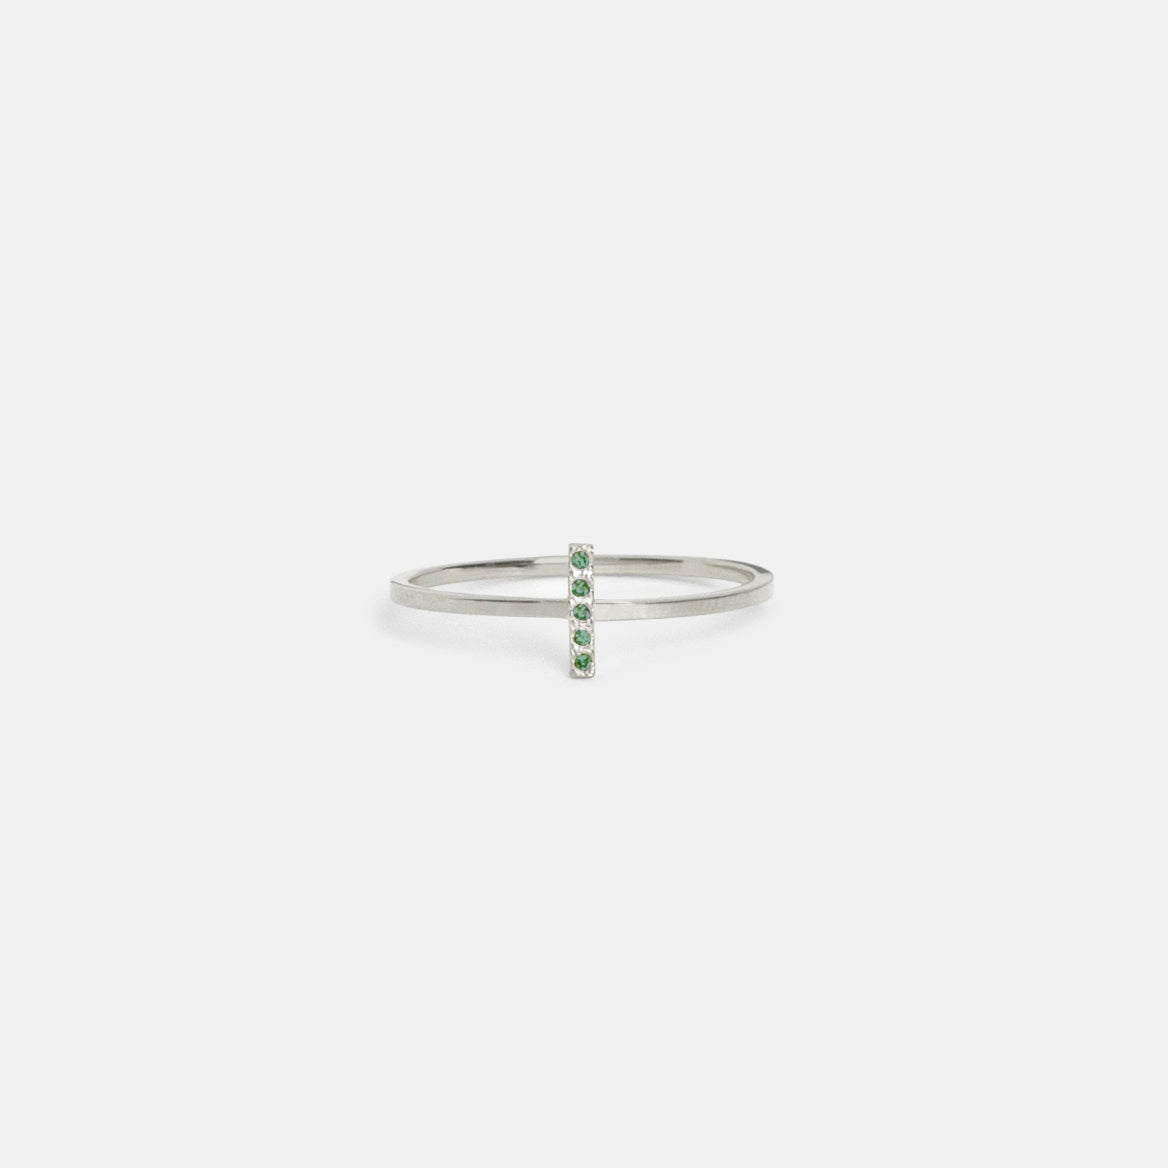 Stevi Cool Ring in 14k White Gold set with Emeralds by SHW Fine Jewelry